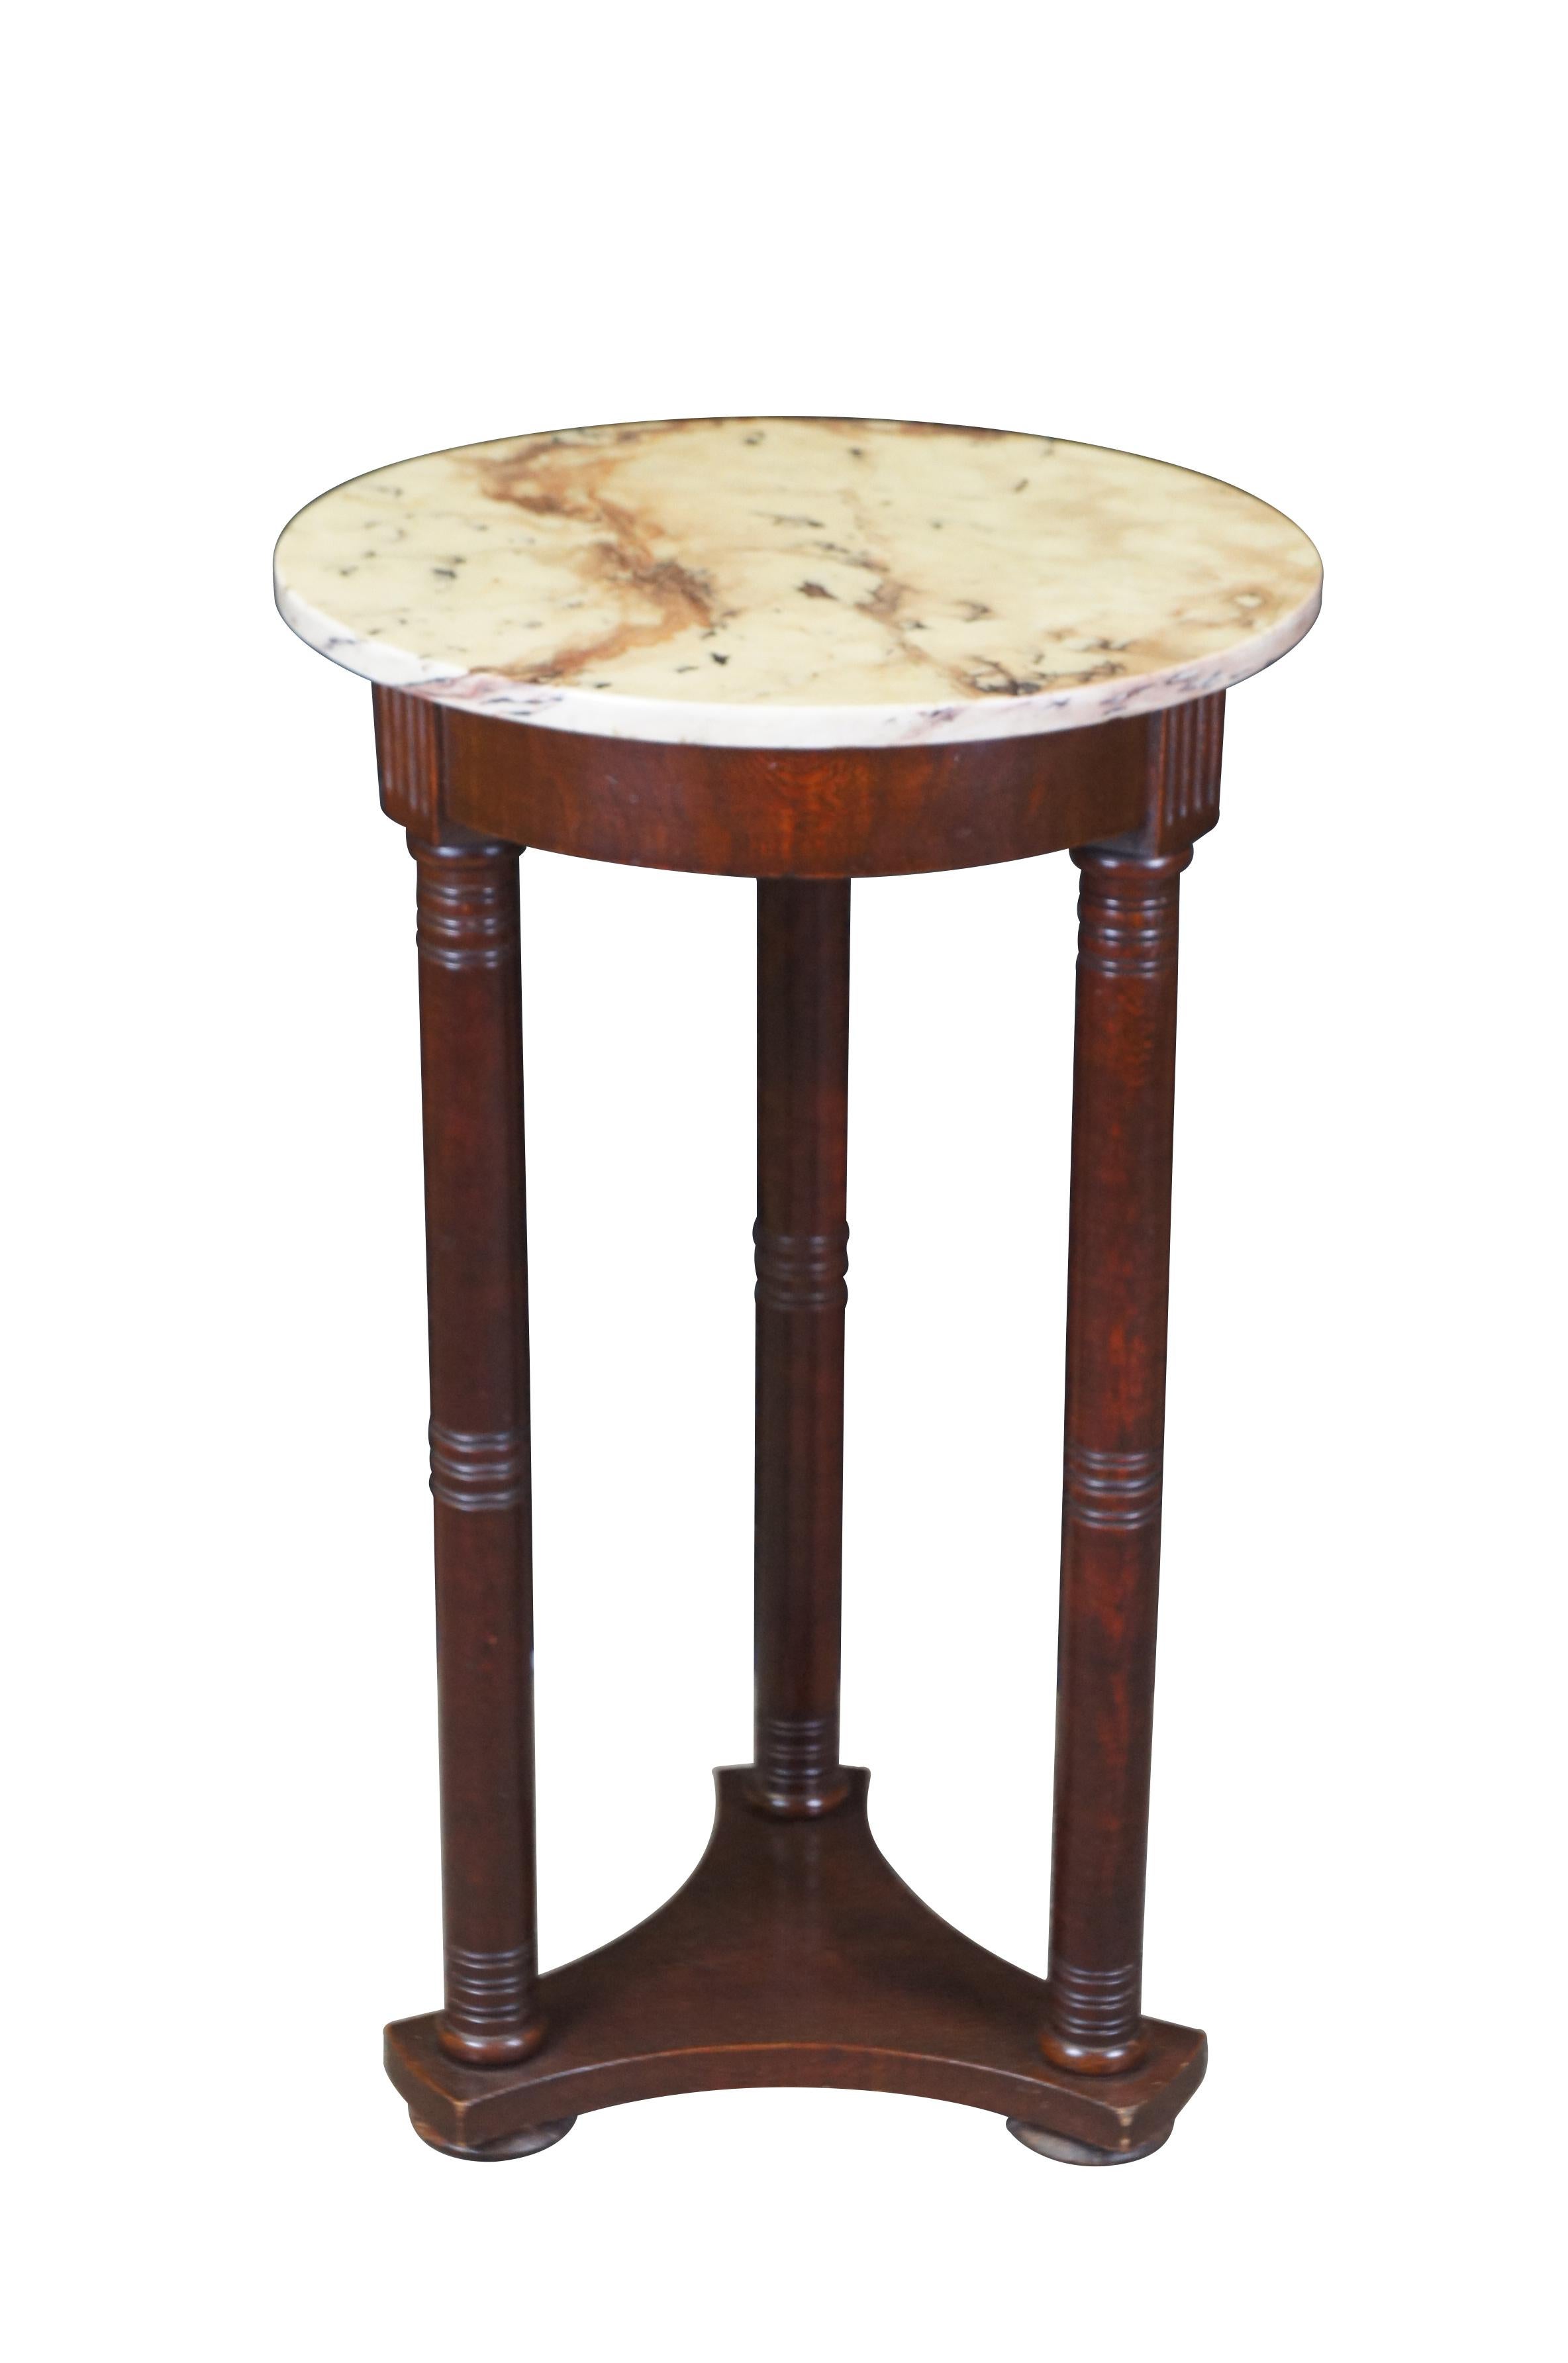 Vintage English Regency / George III style pedestal table.  Made of mahogany featuring triangular base supporting turned columns and round marble top.

Dimensions:
17.75